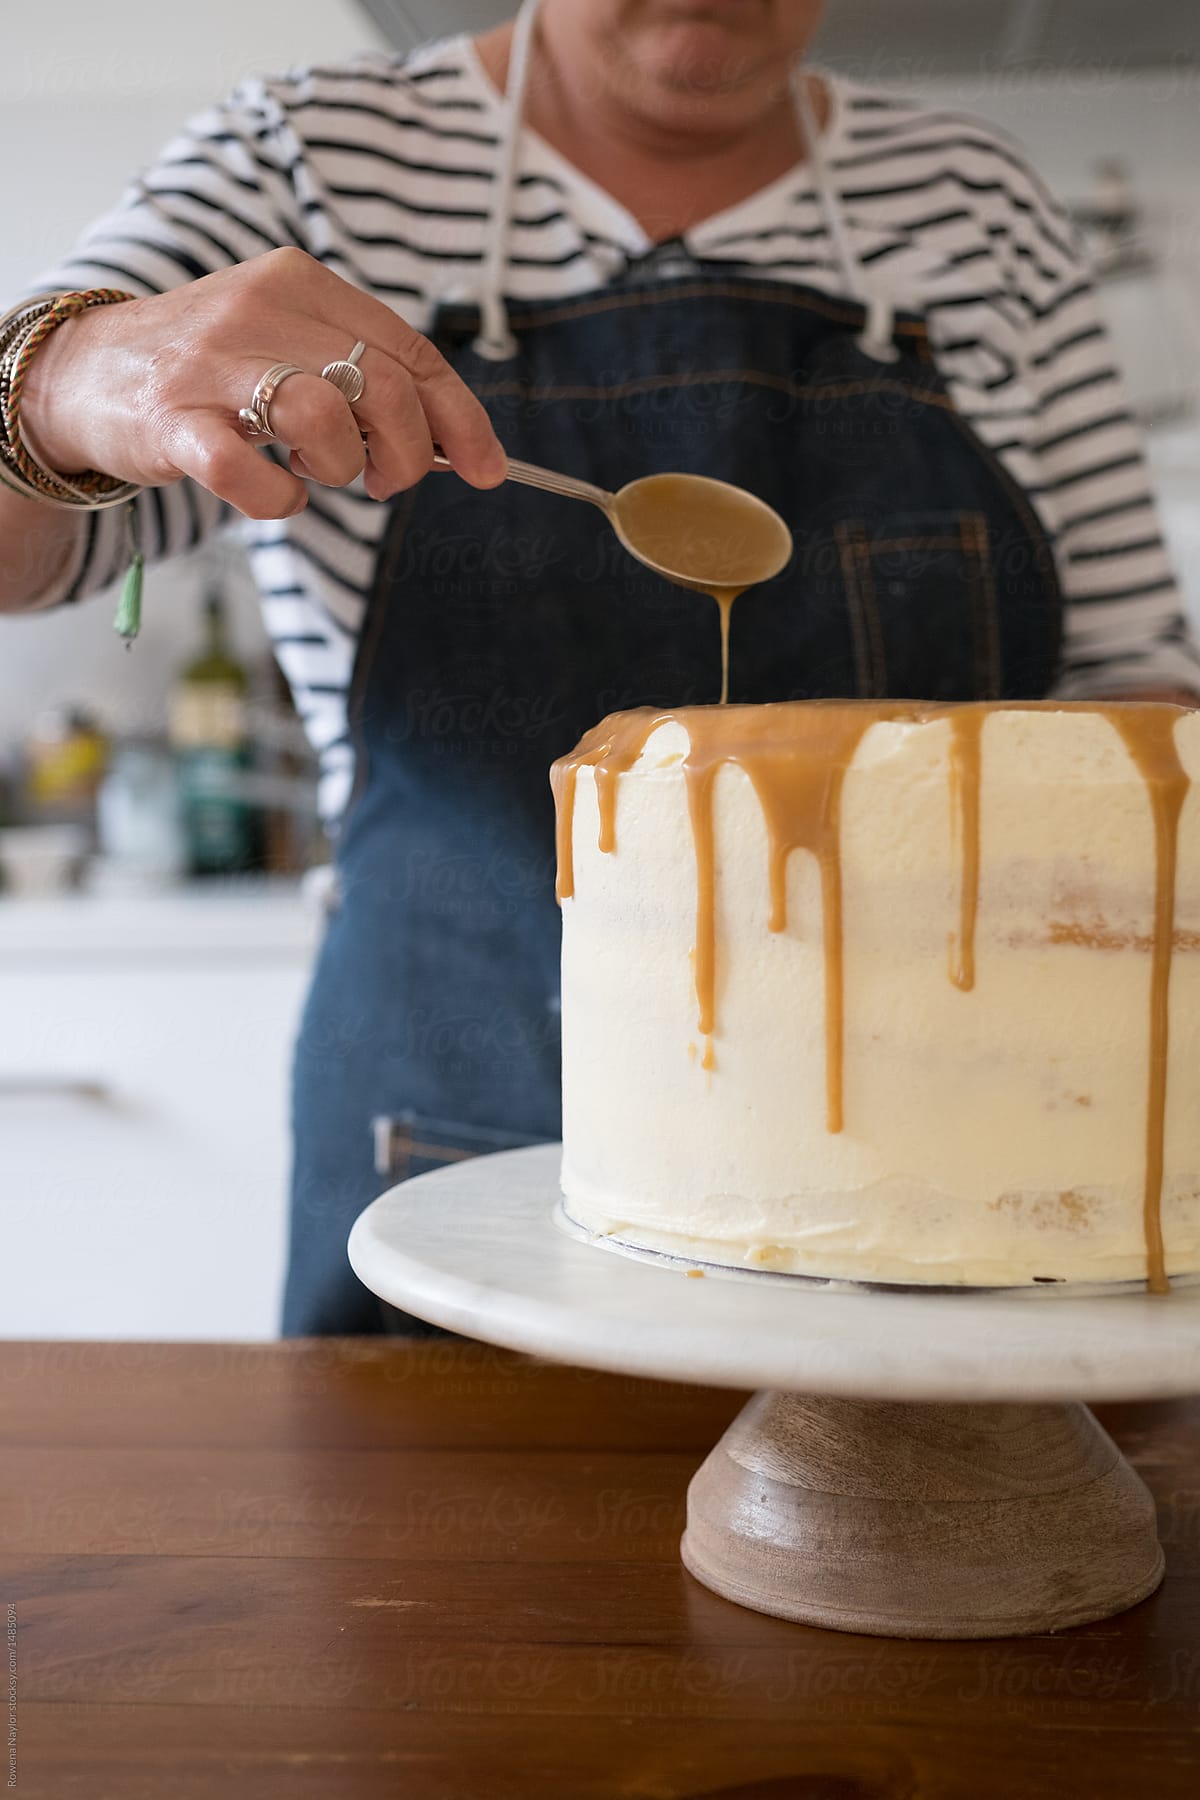 Home cook decorating a large cake with frosting and salted caramel